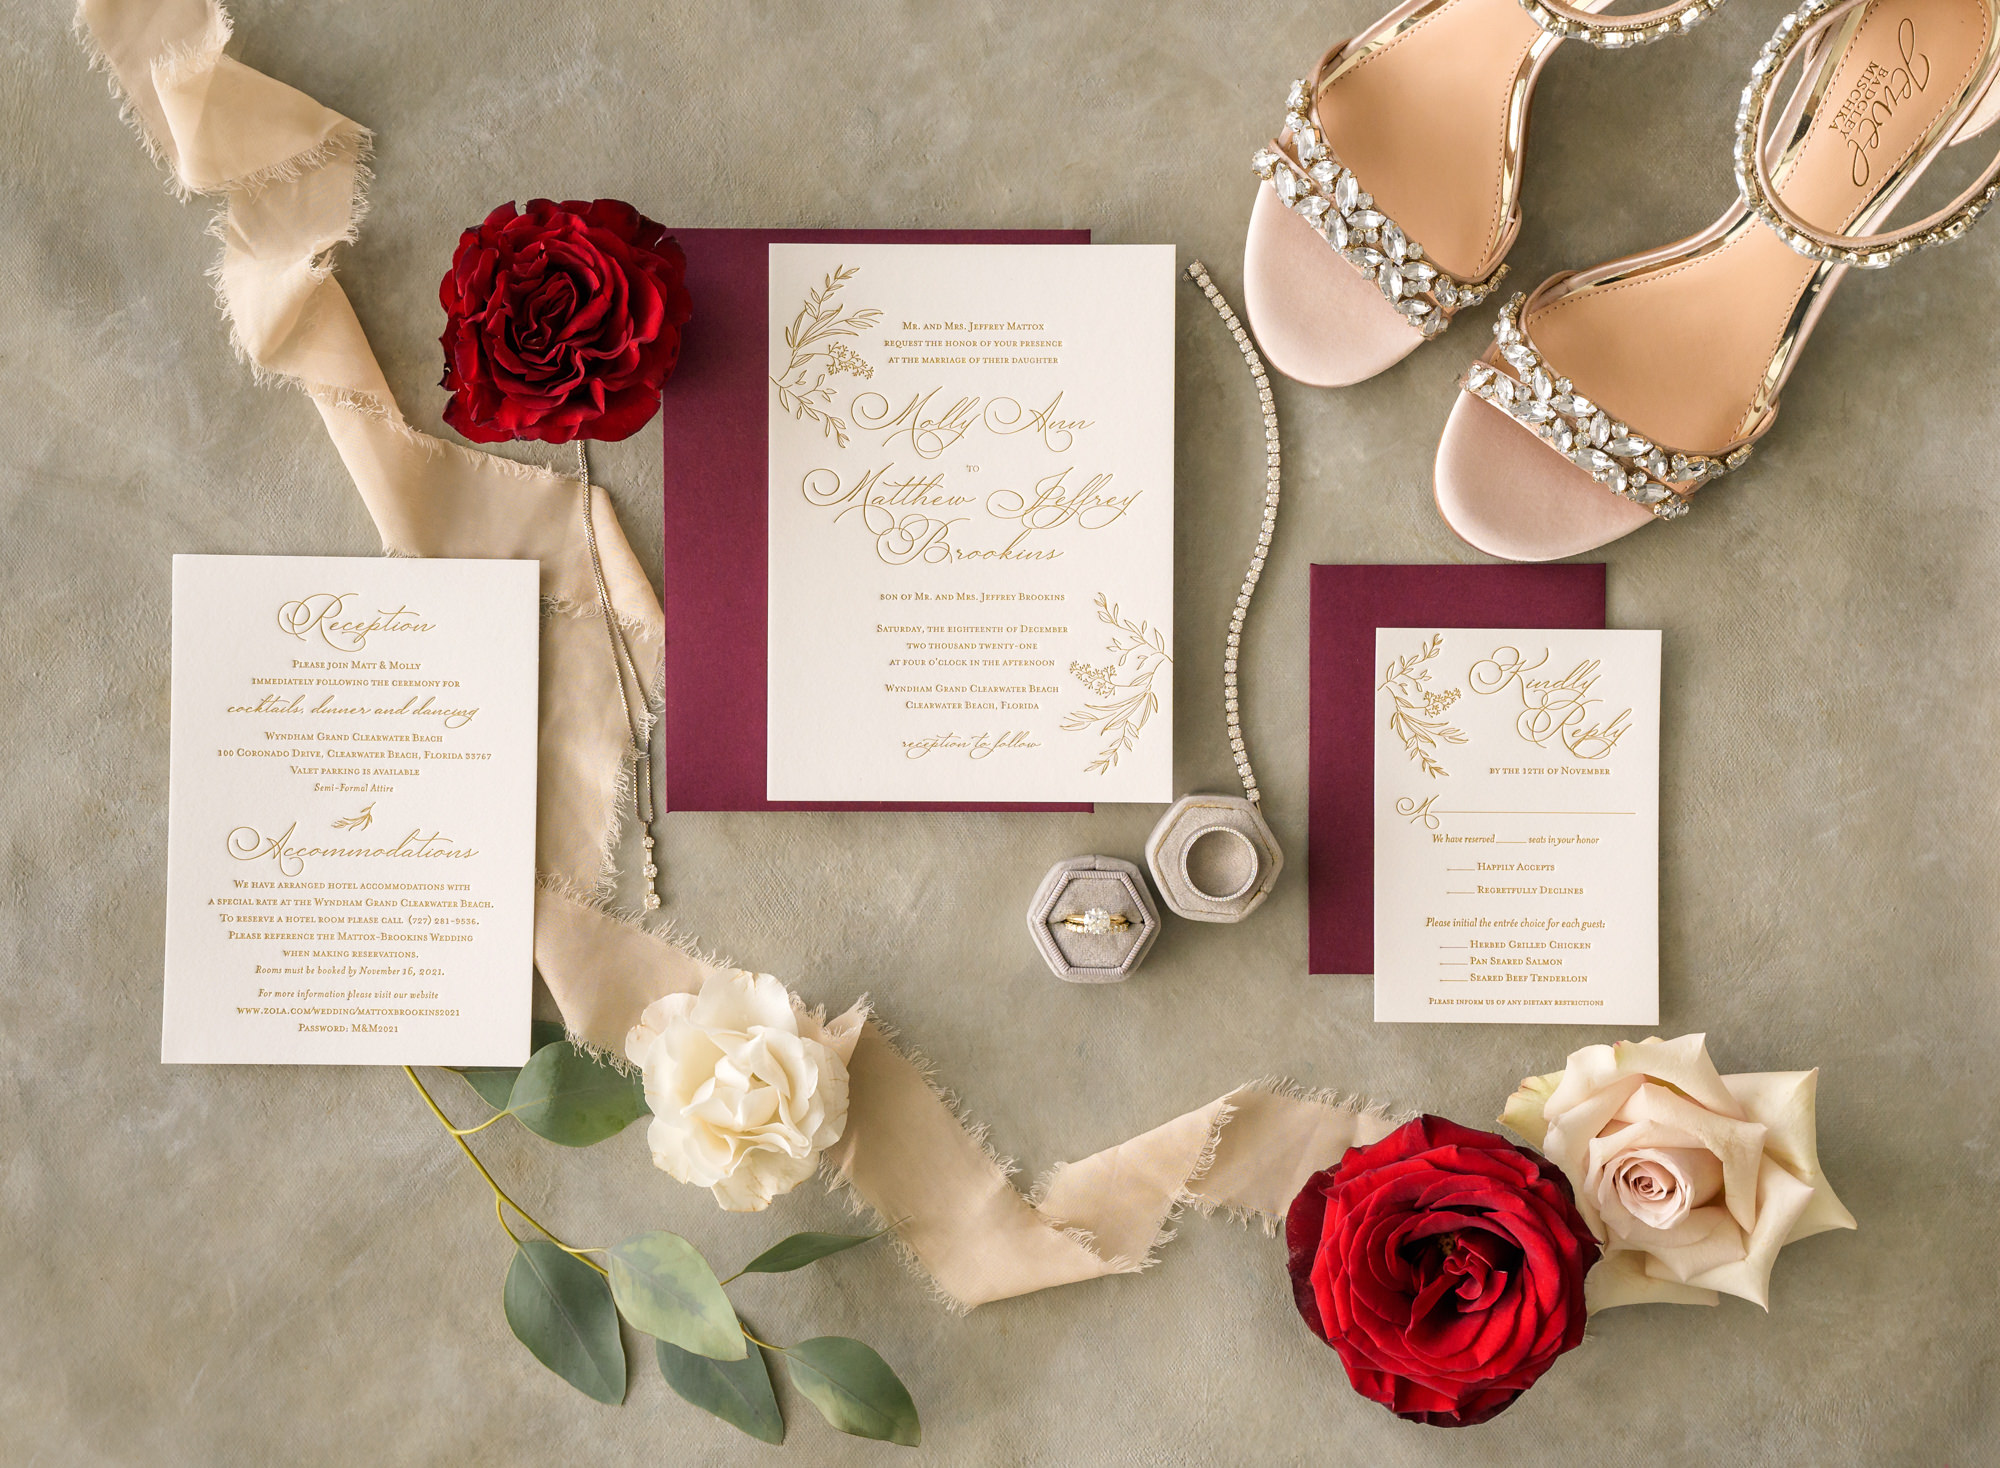 Classic Burgundy Wedding Invitation Suite Ideas | Tampa Bay Stationery A&P Designs